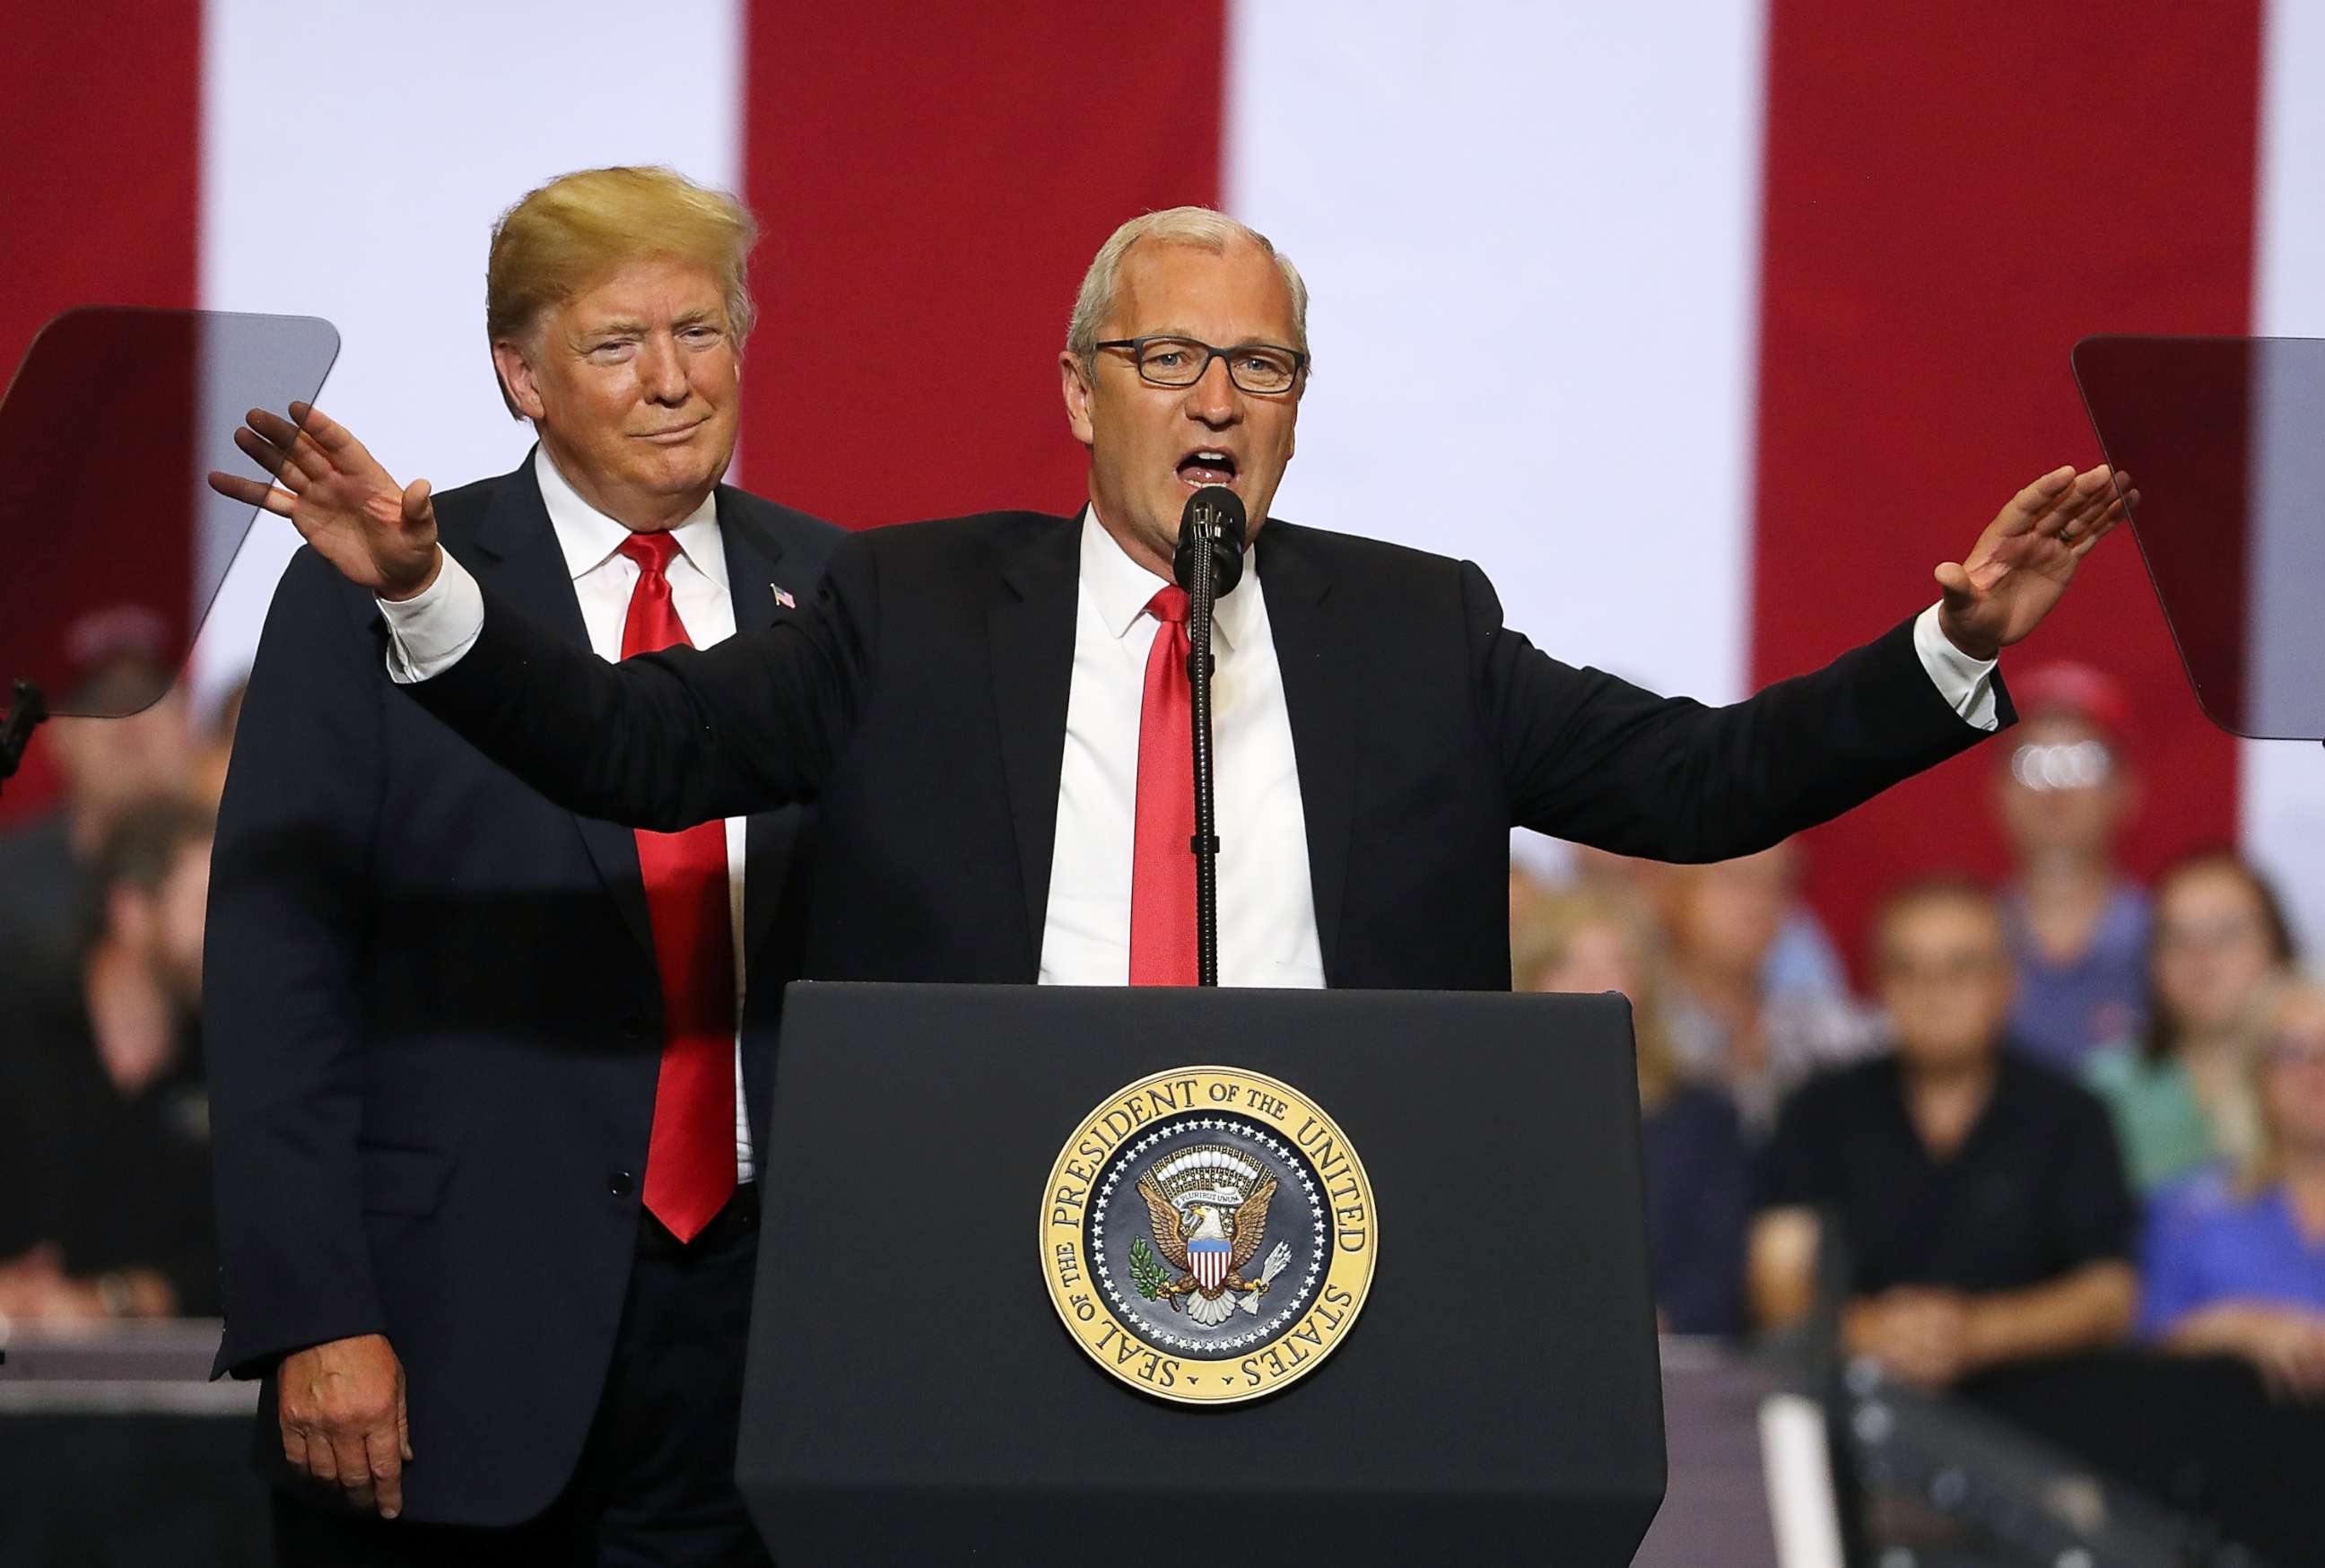 PHOTO: President Donald Trump looks on as Republican candidate for senate, Rep. Kevin Cramer, speaks to supporters during a campaign rally at Scheels Arena on June 27, 2018 in Fargo, N.D.